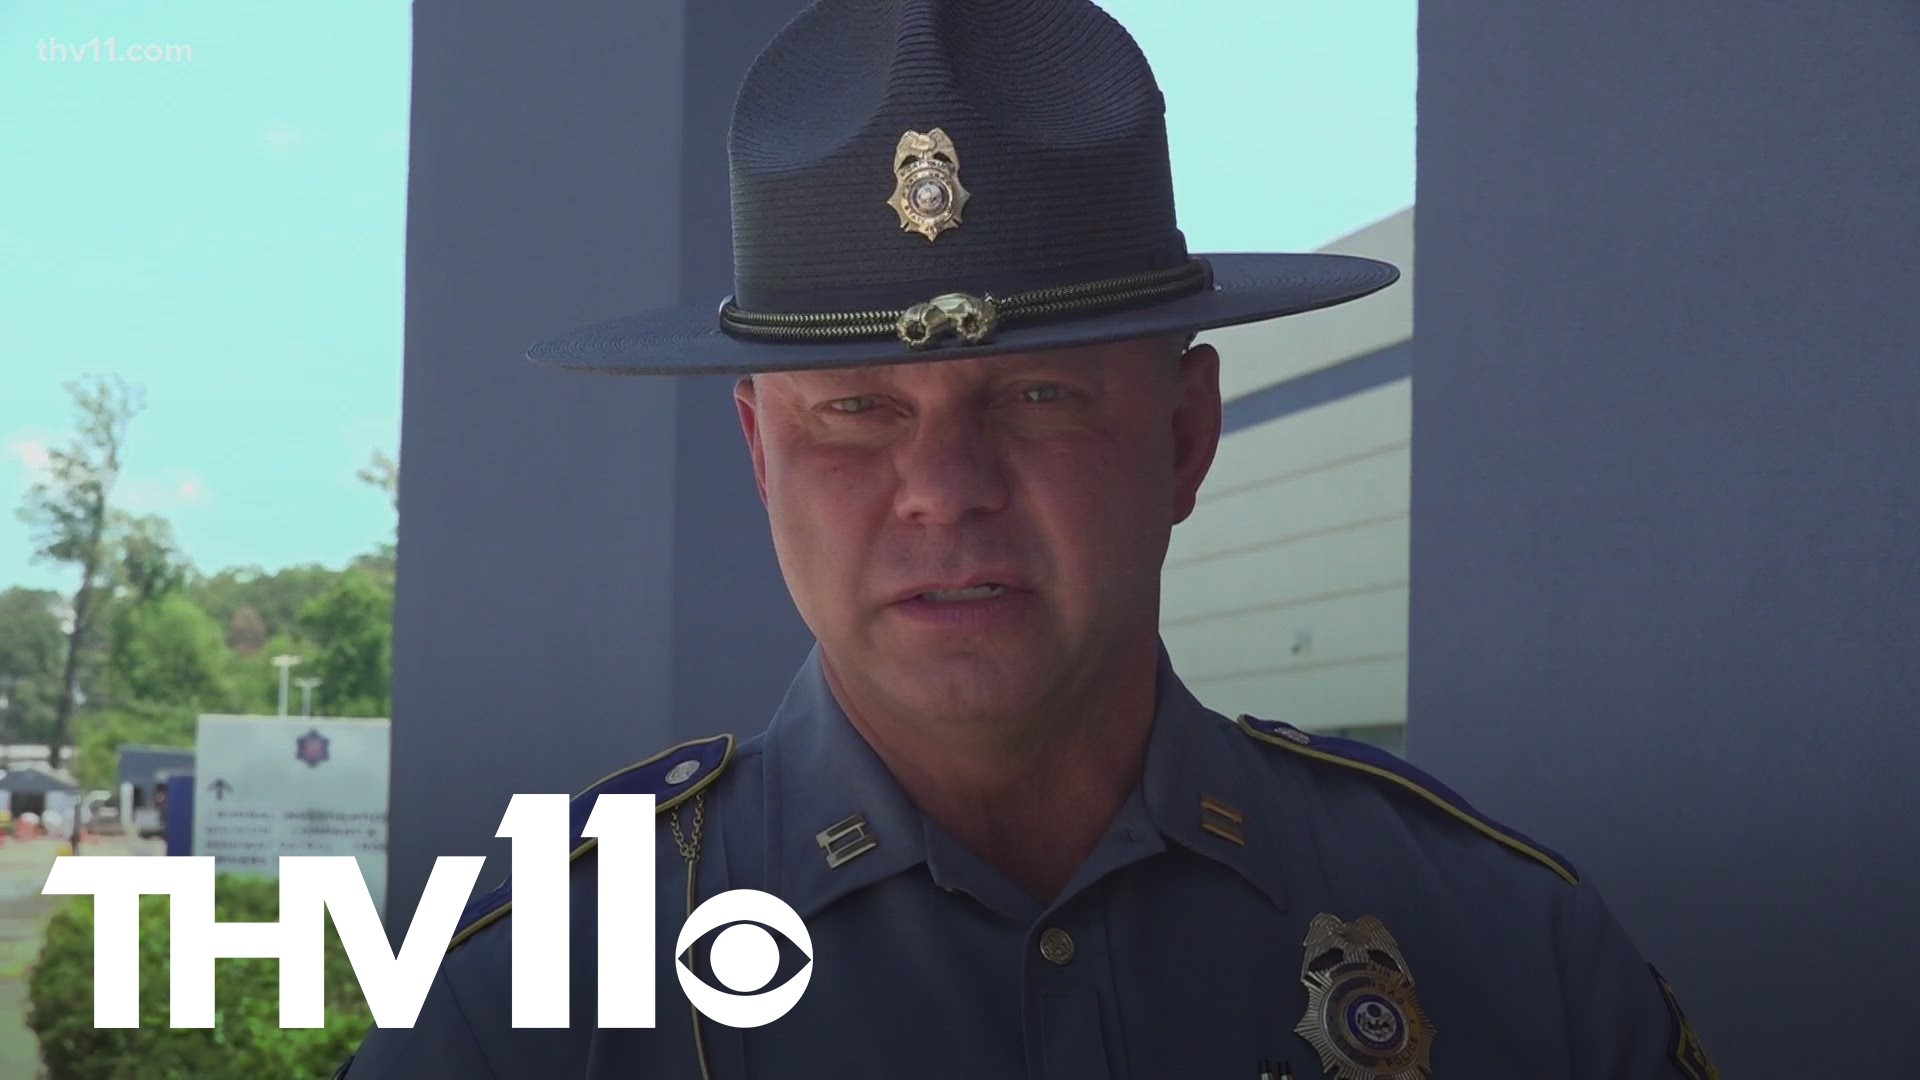 Over the weekend, people took to social media to ask why there were so many Arkansas state troopers pulling people over on main roads. Here's why.